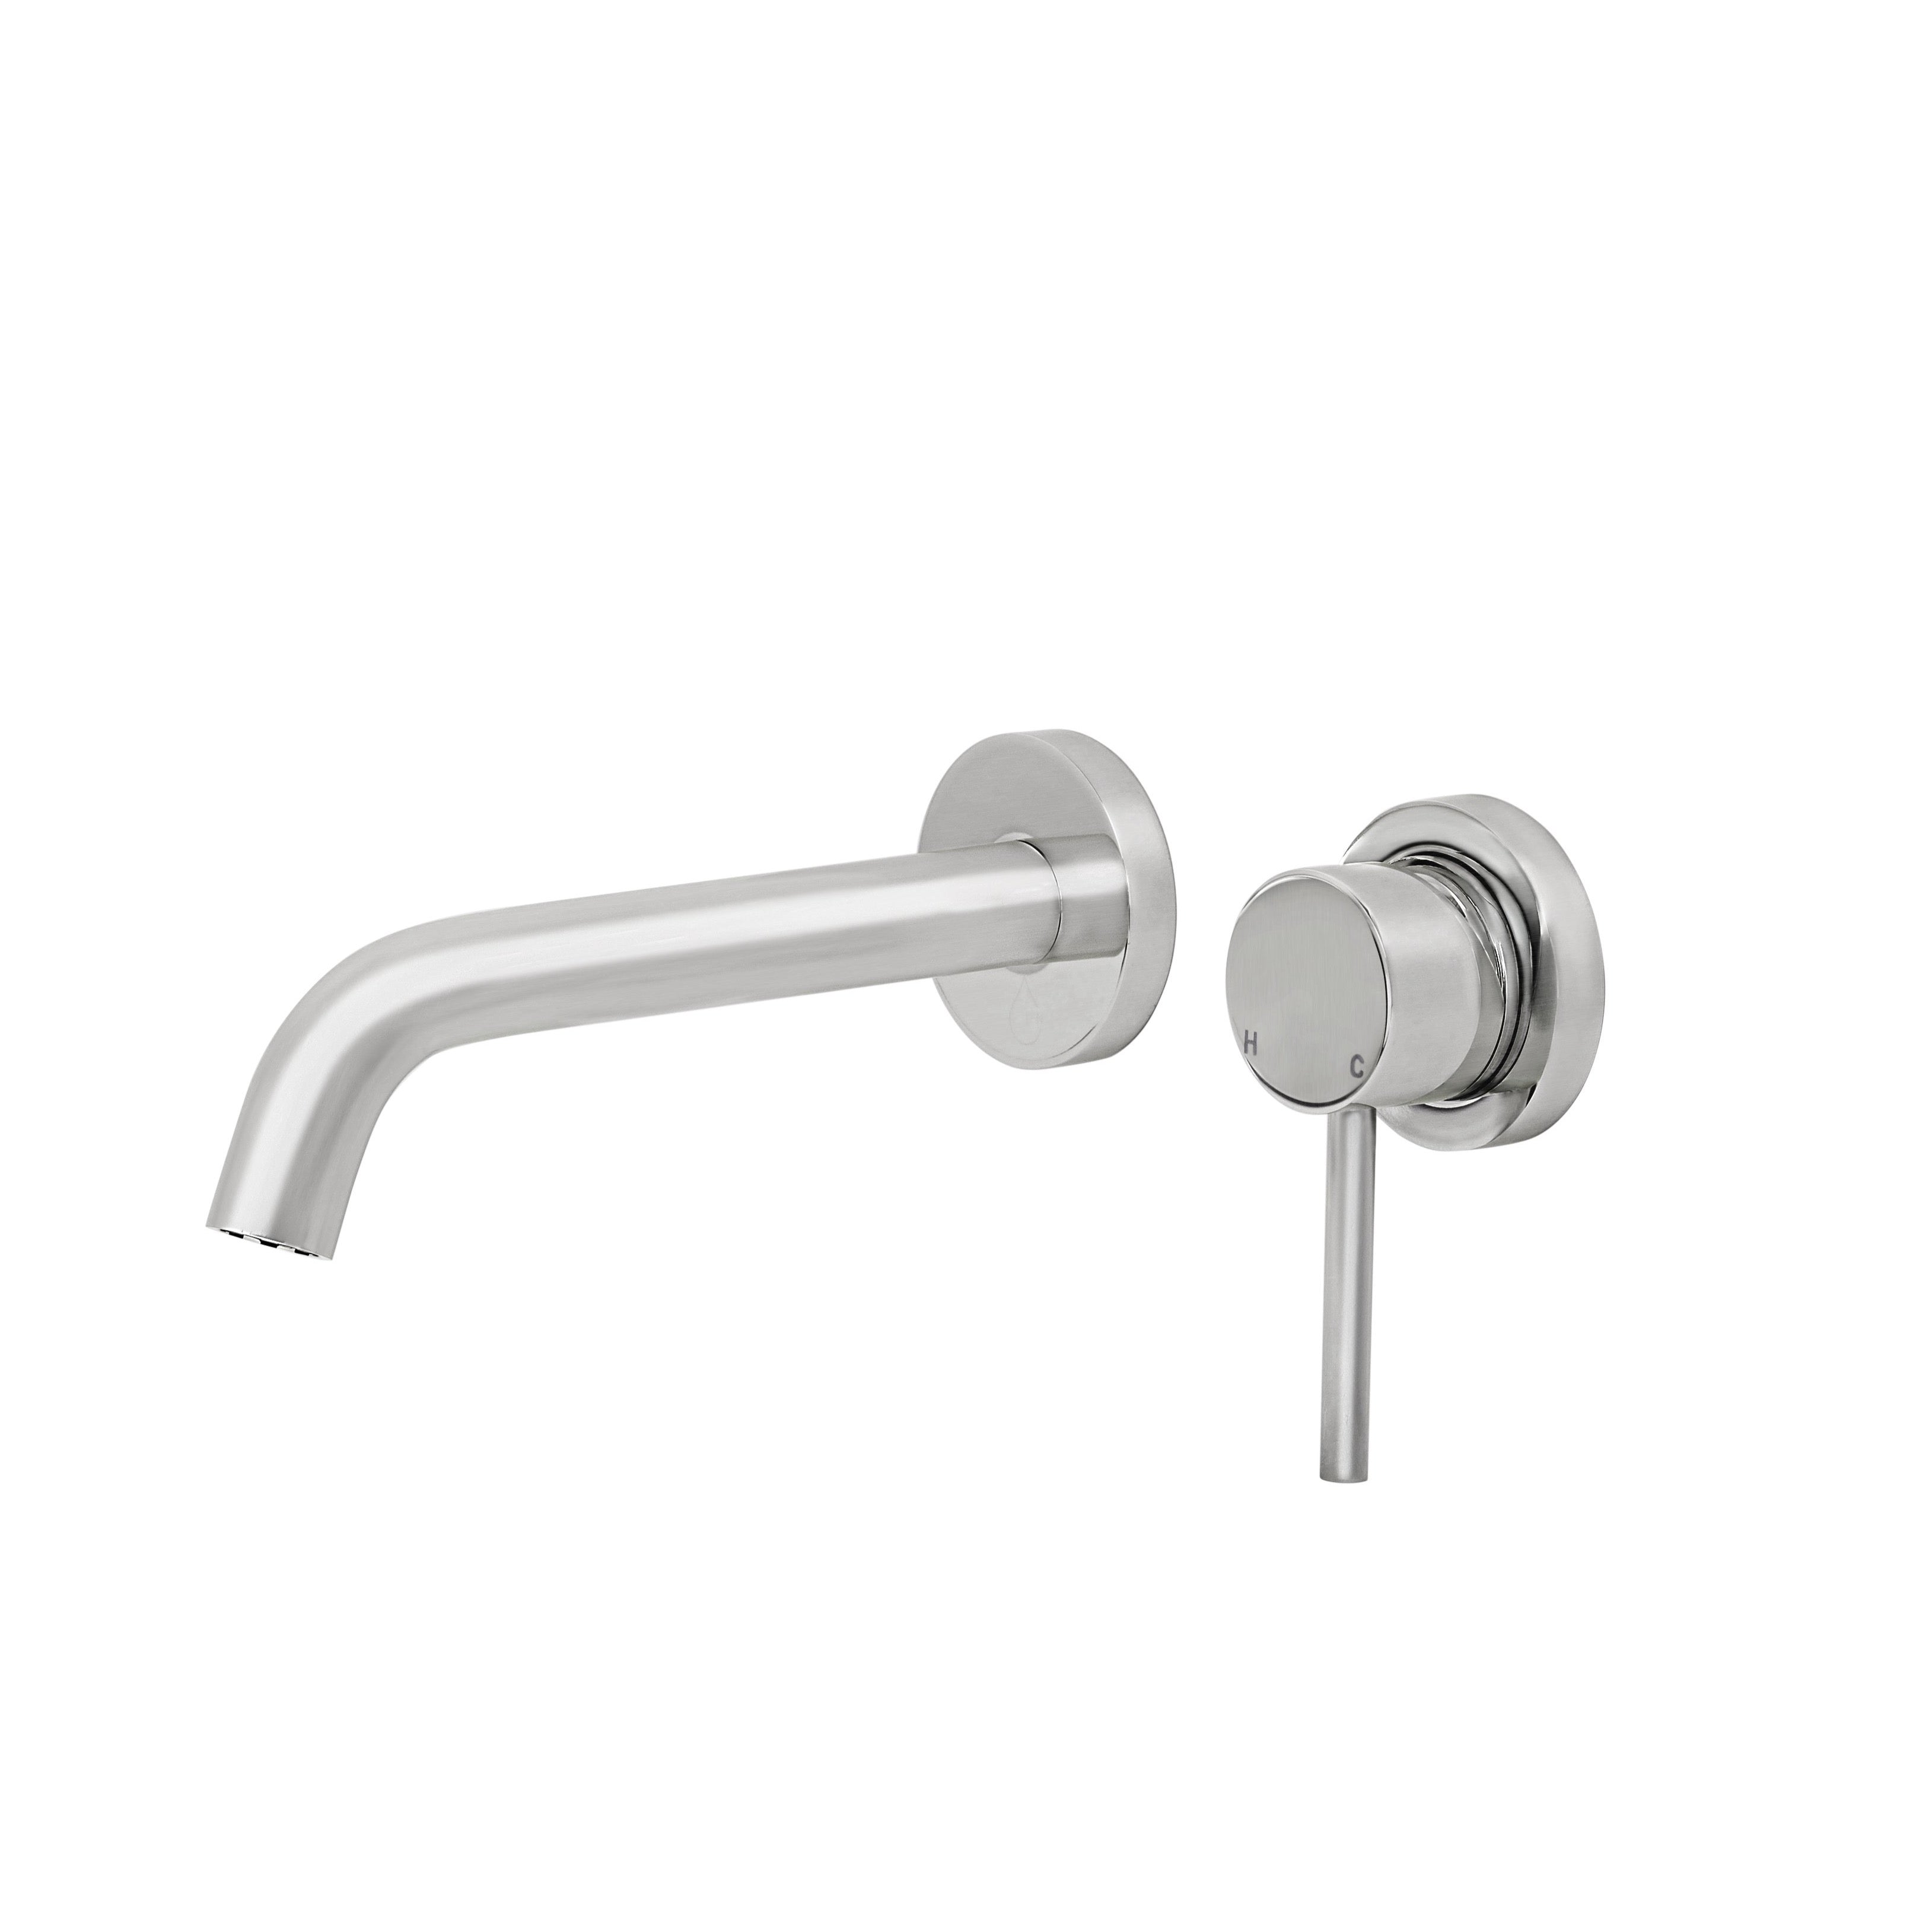 Bondi Pin Lever Wall Mixer Set with Curved Spout in Brushed Nickel